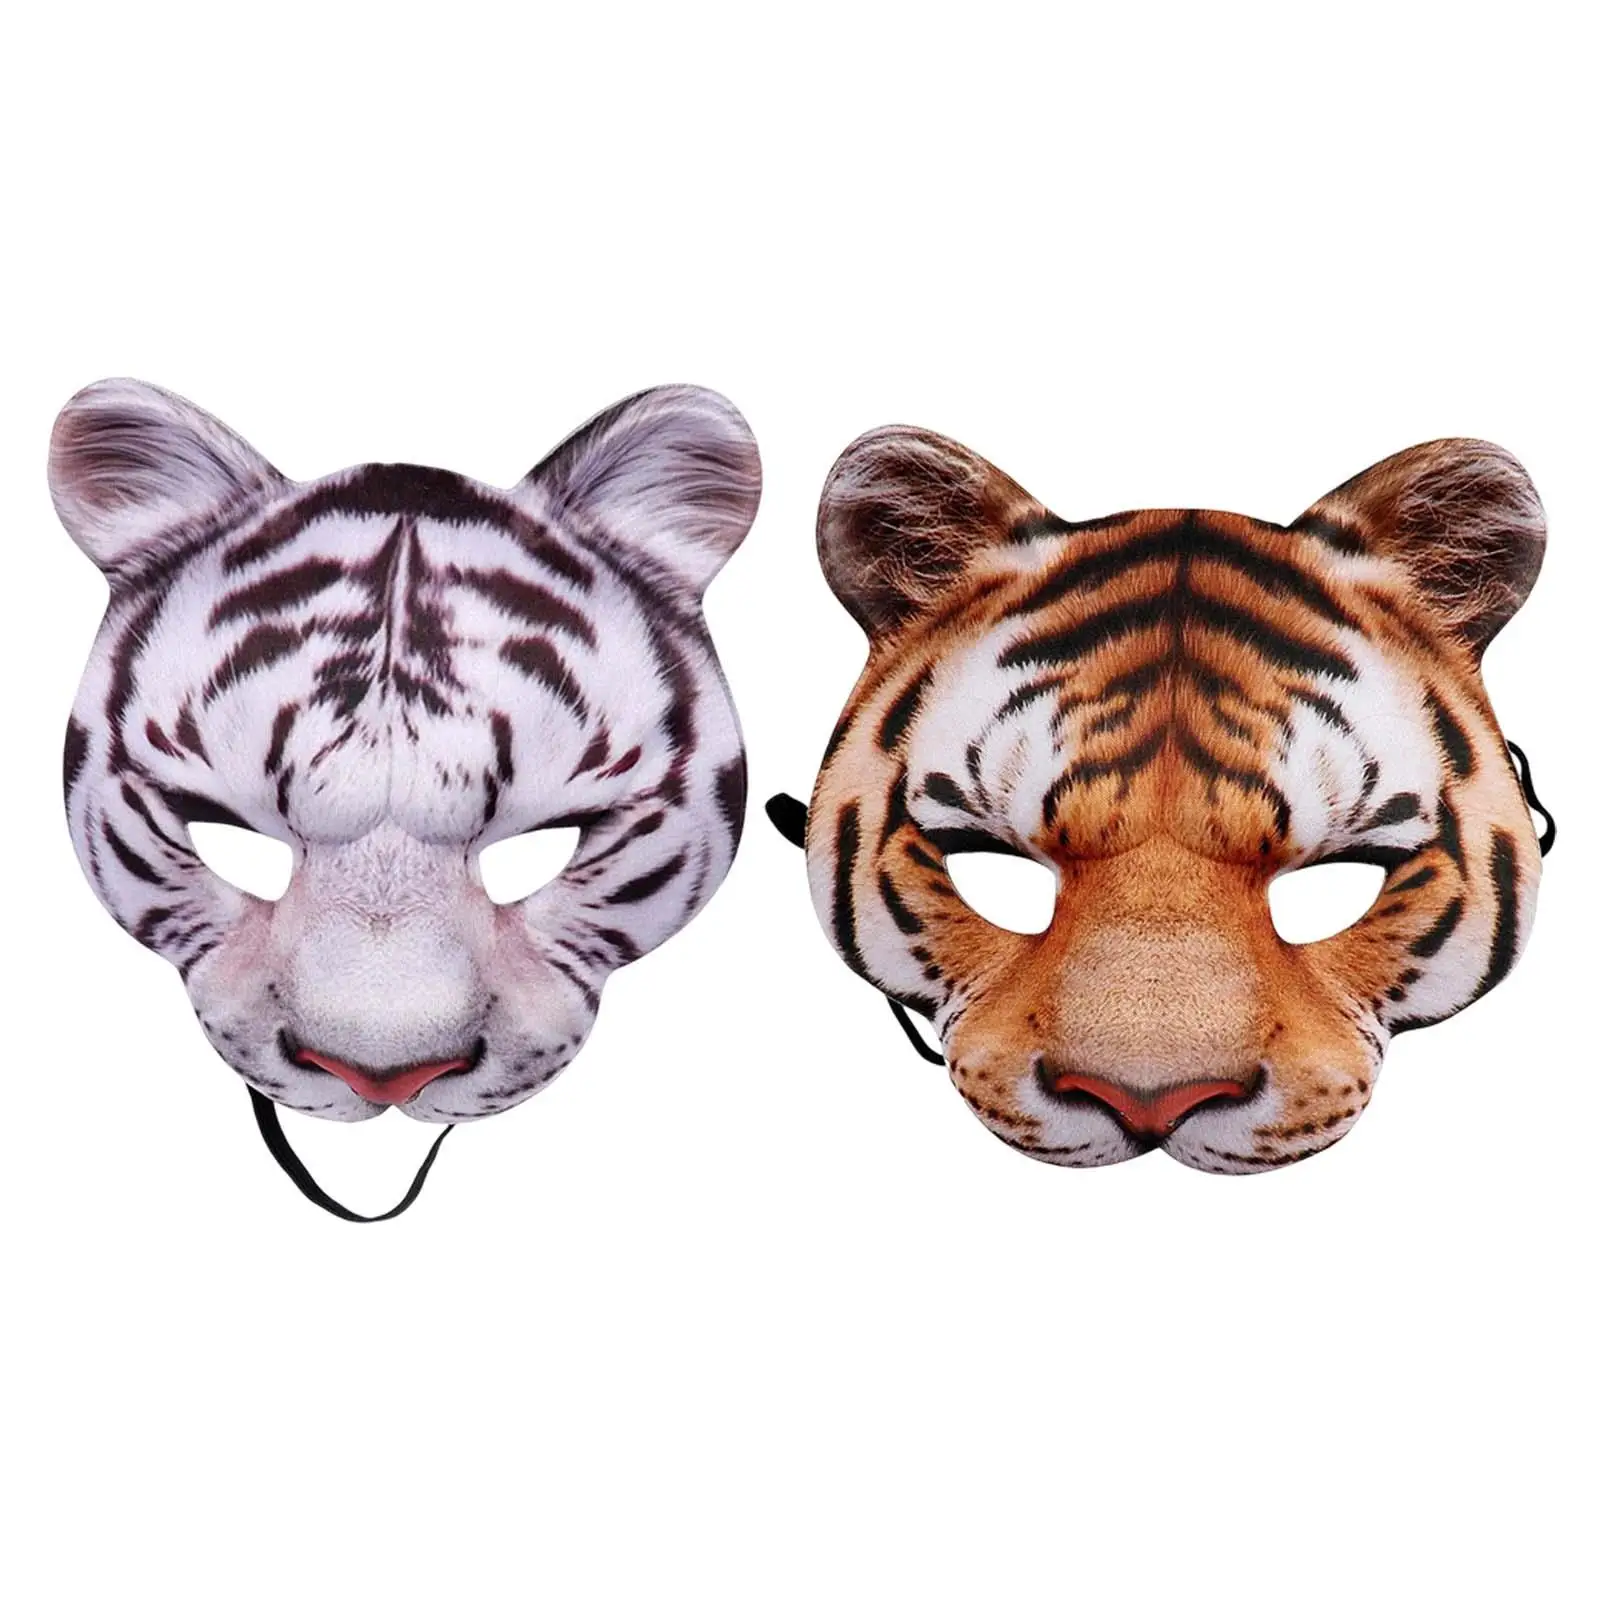 Novelty Woman Tiger Mask Half Face Cosplay Props Decoration Party Supplies for Halloween Animal Cosplay Holiday Masquerade Adult